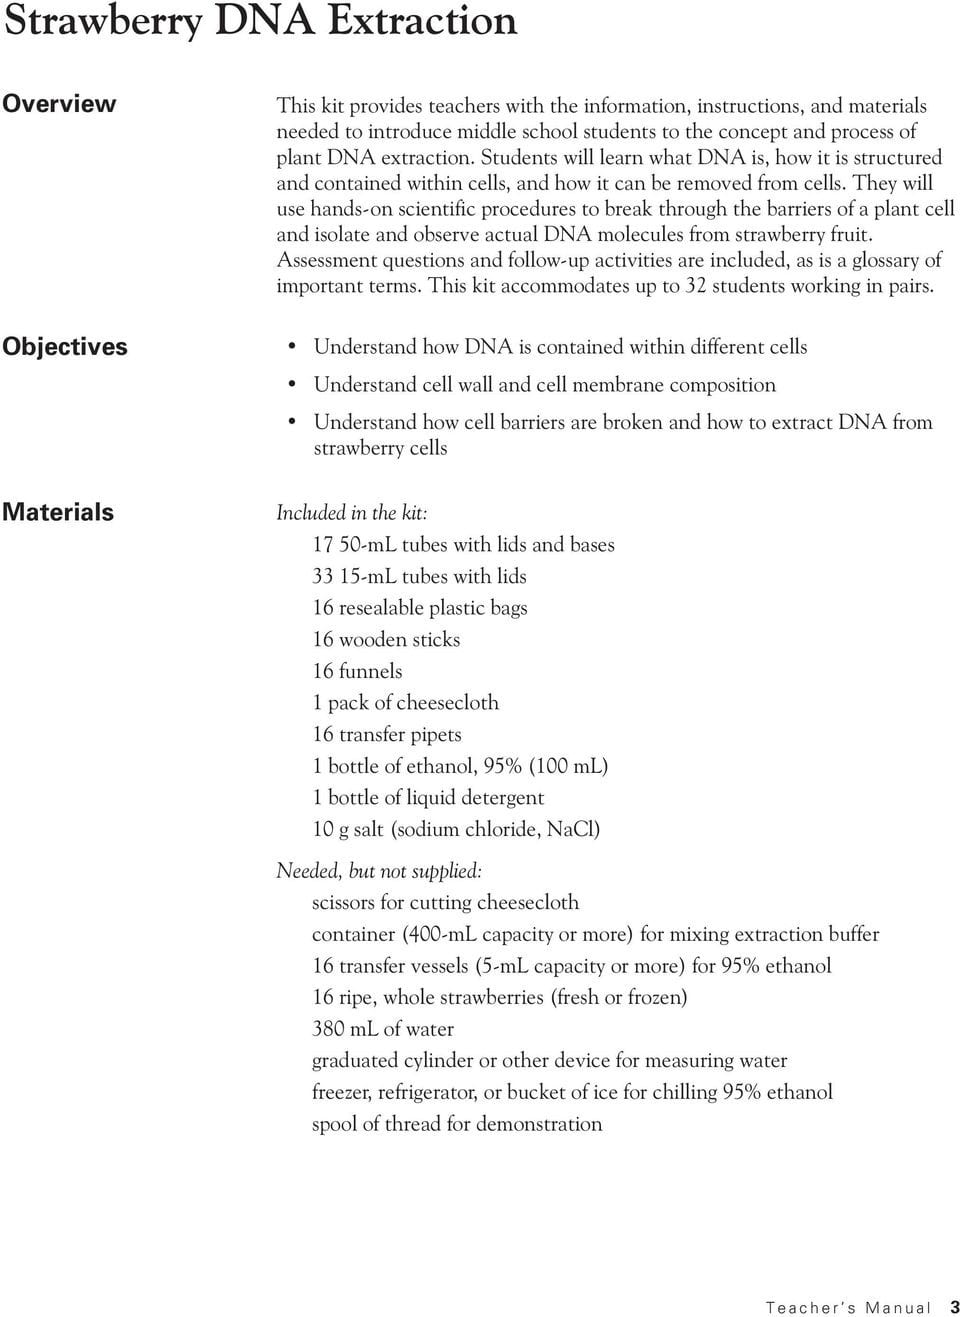 Strawberry Dna Extraction  Pdf